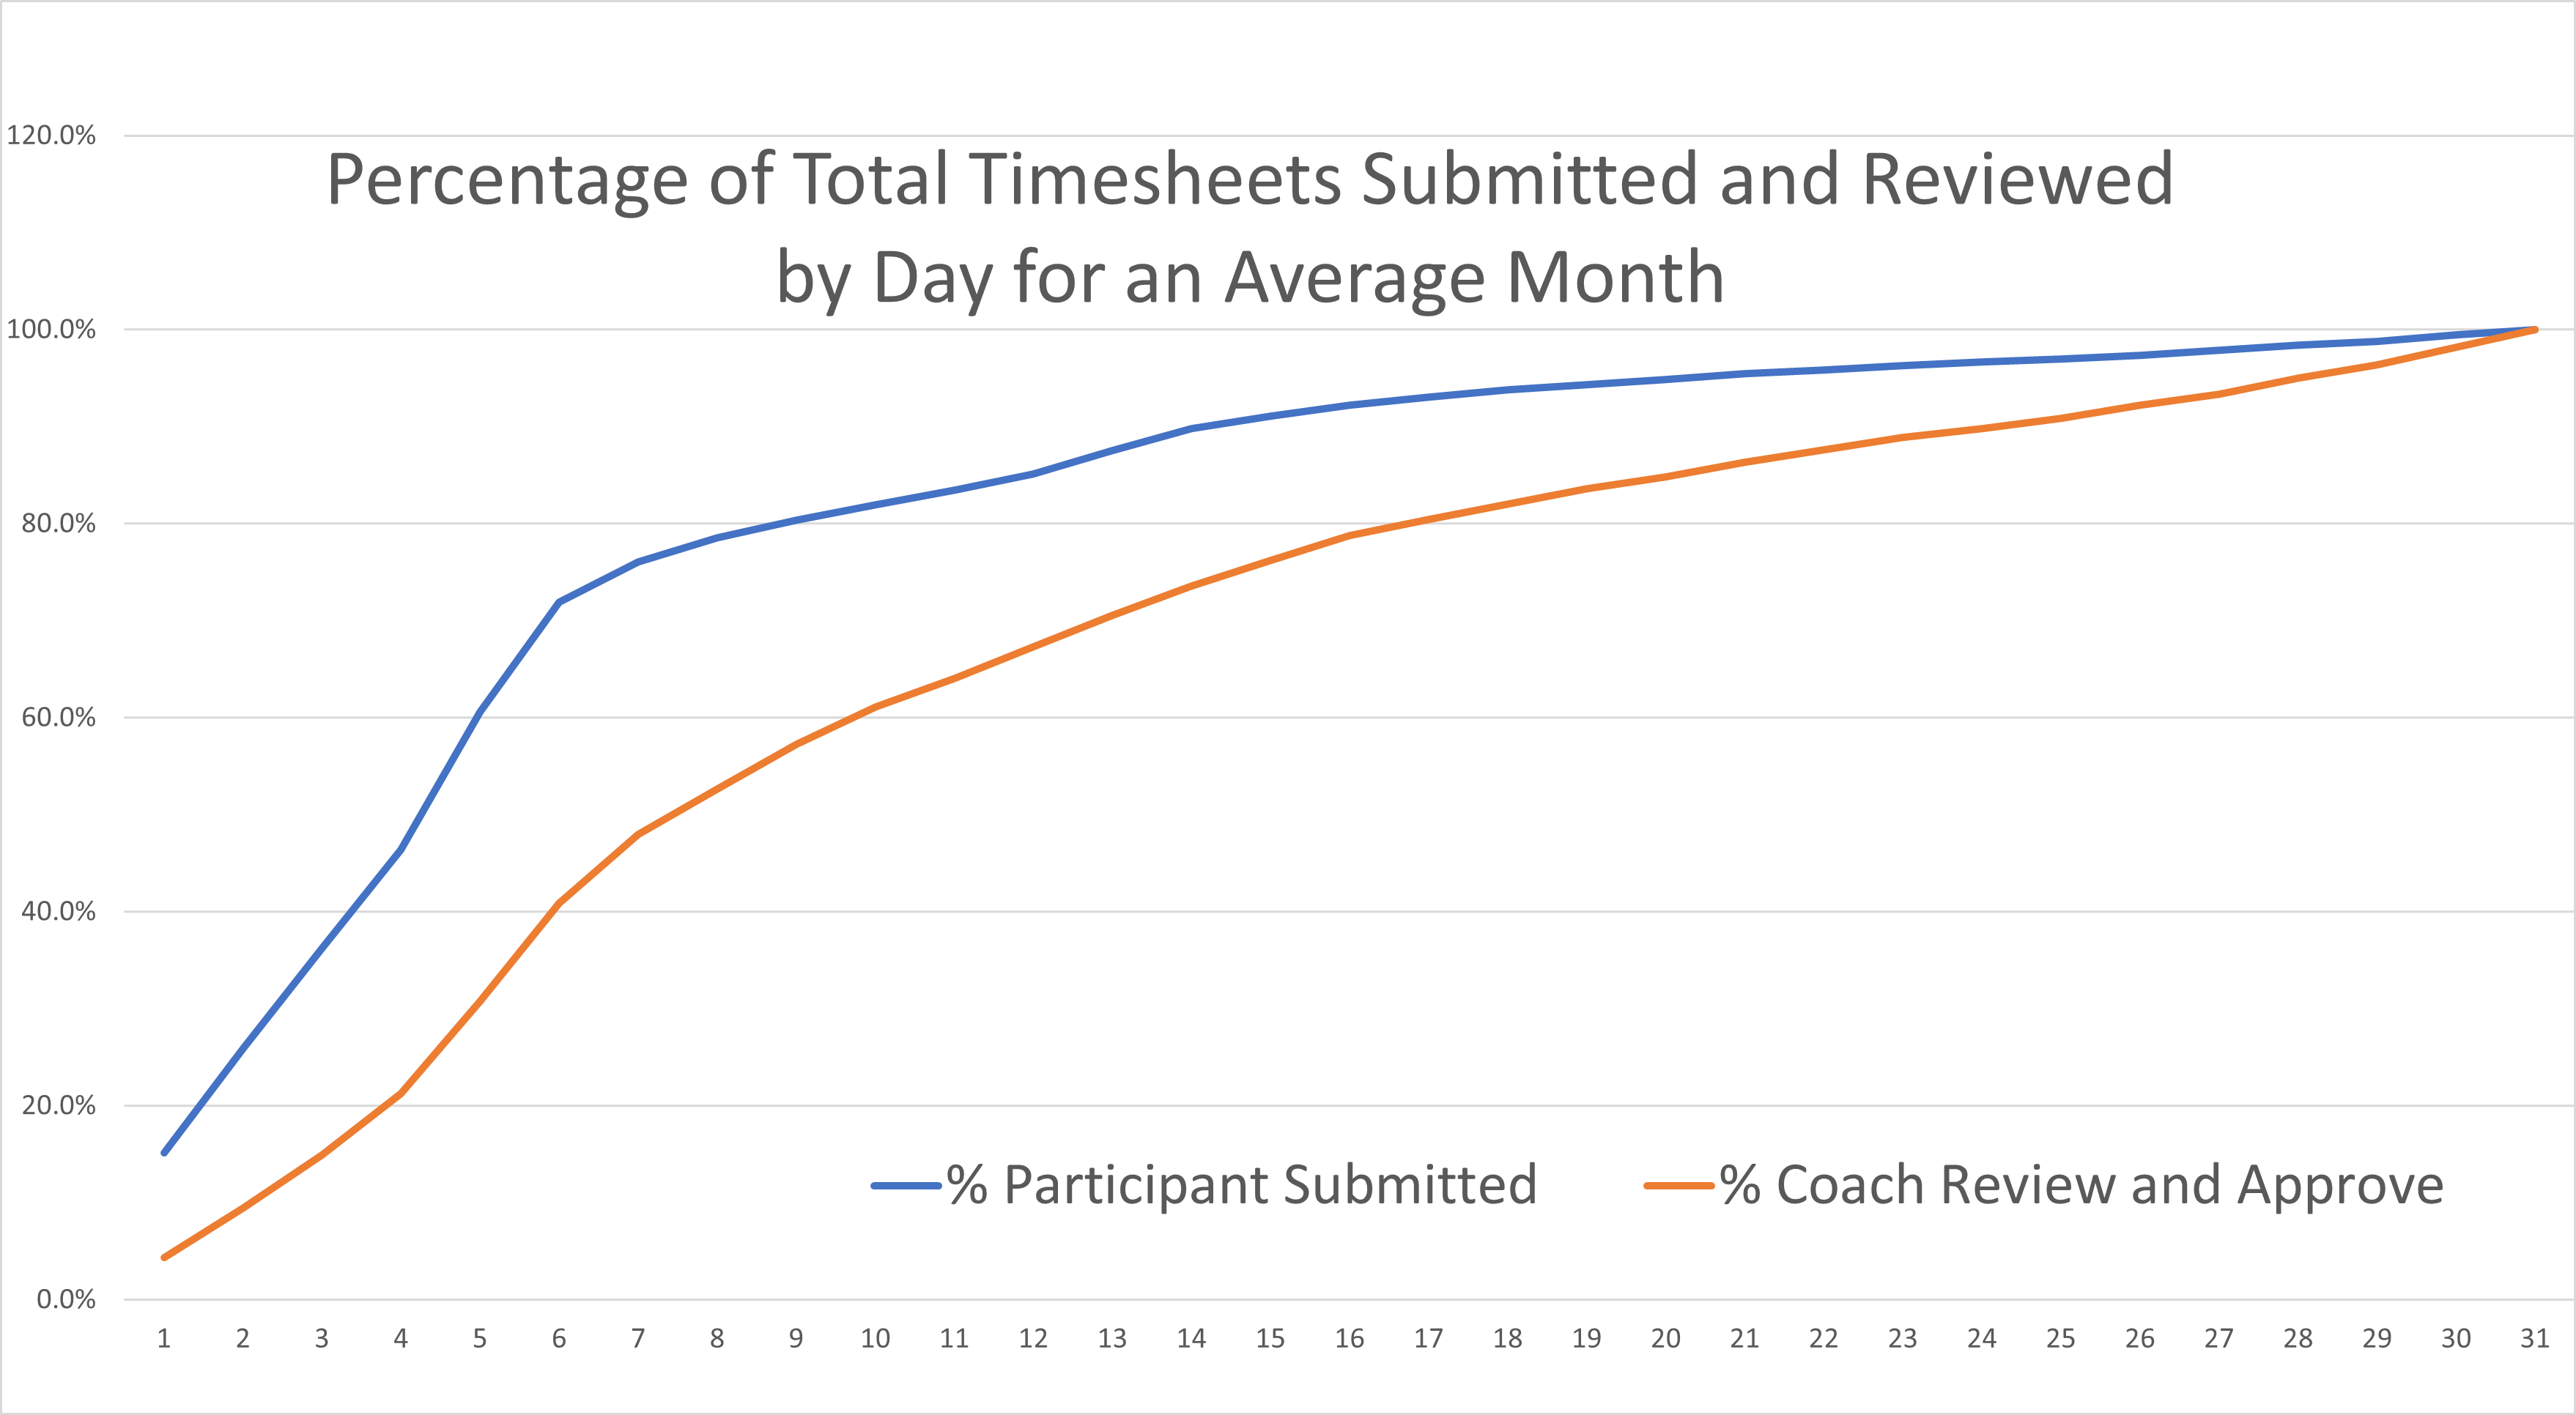 Graph showing the percentage of timesheets submitted and reviewed in TuaPath by day for an average month